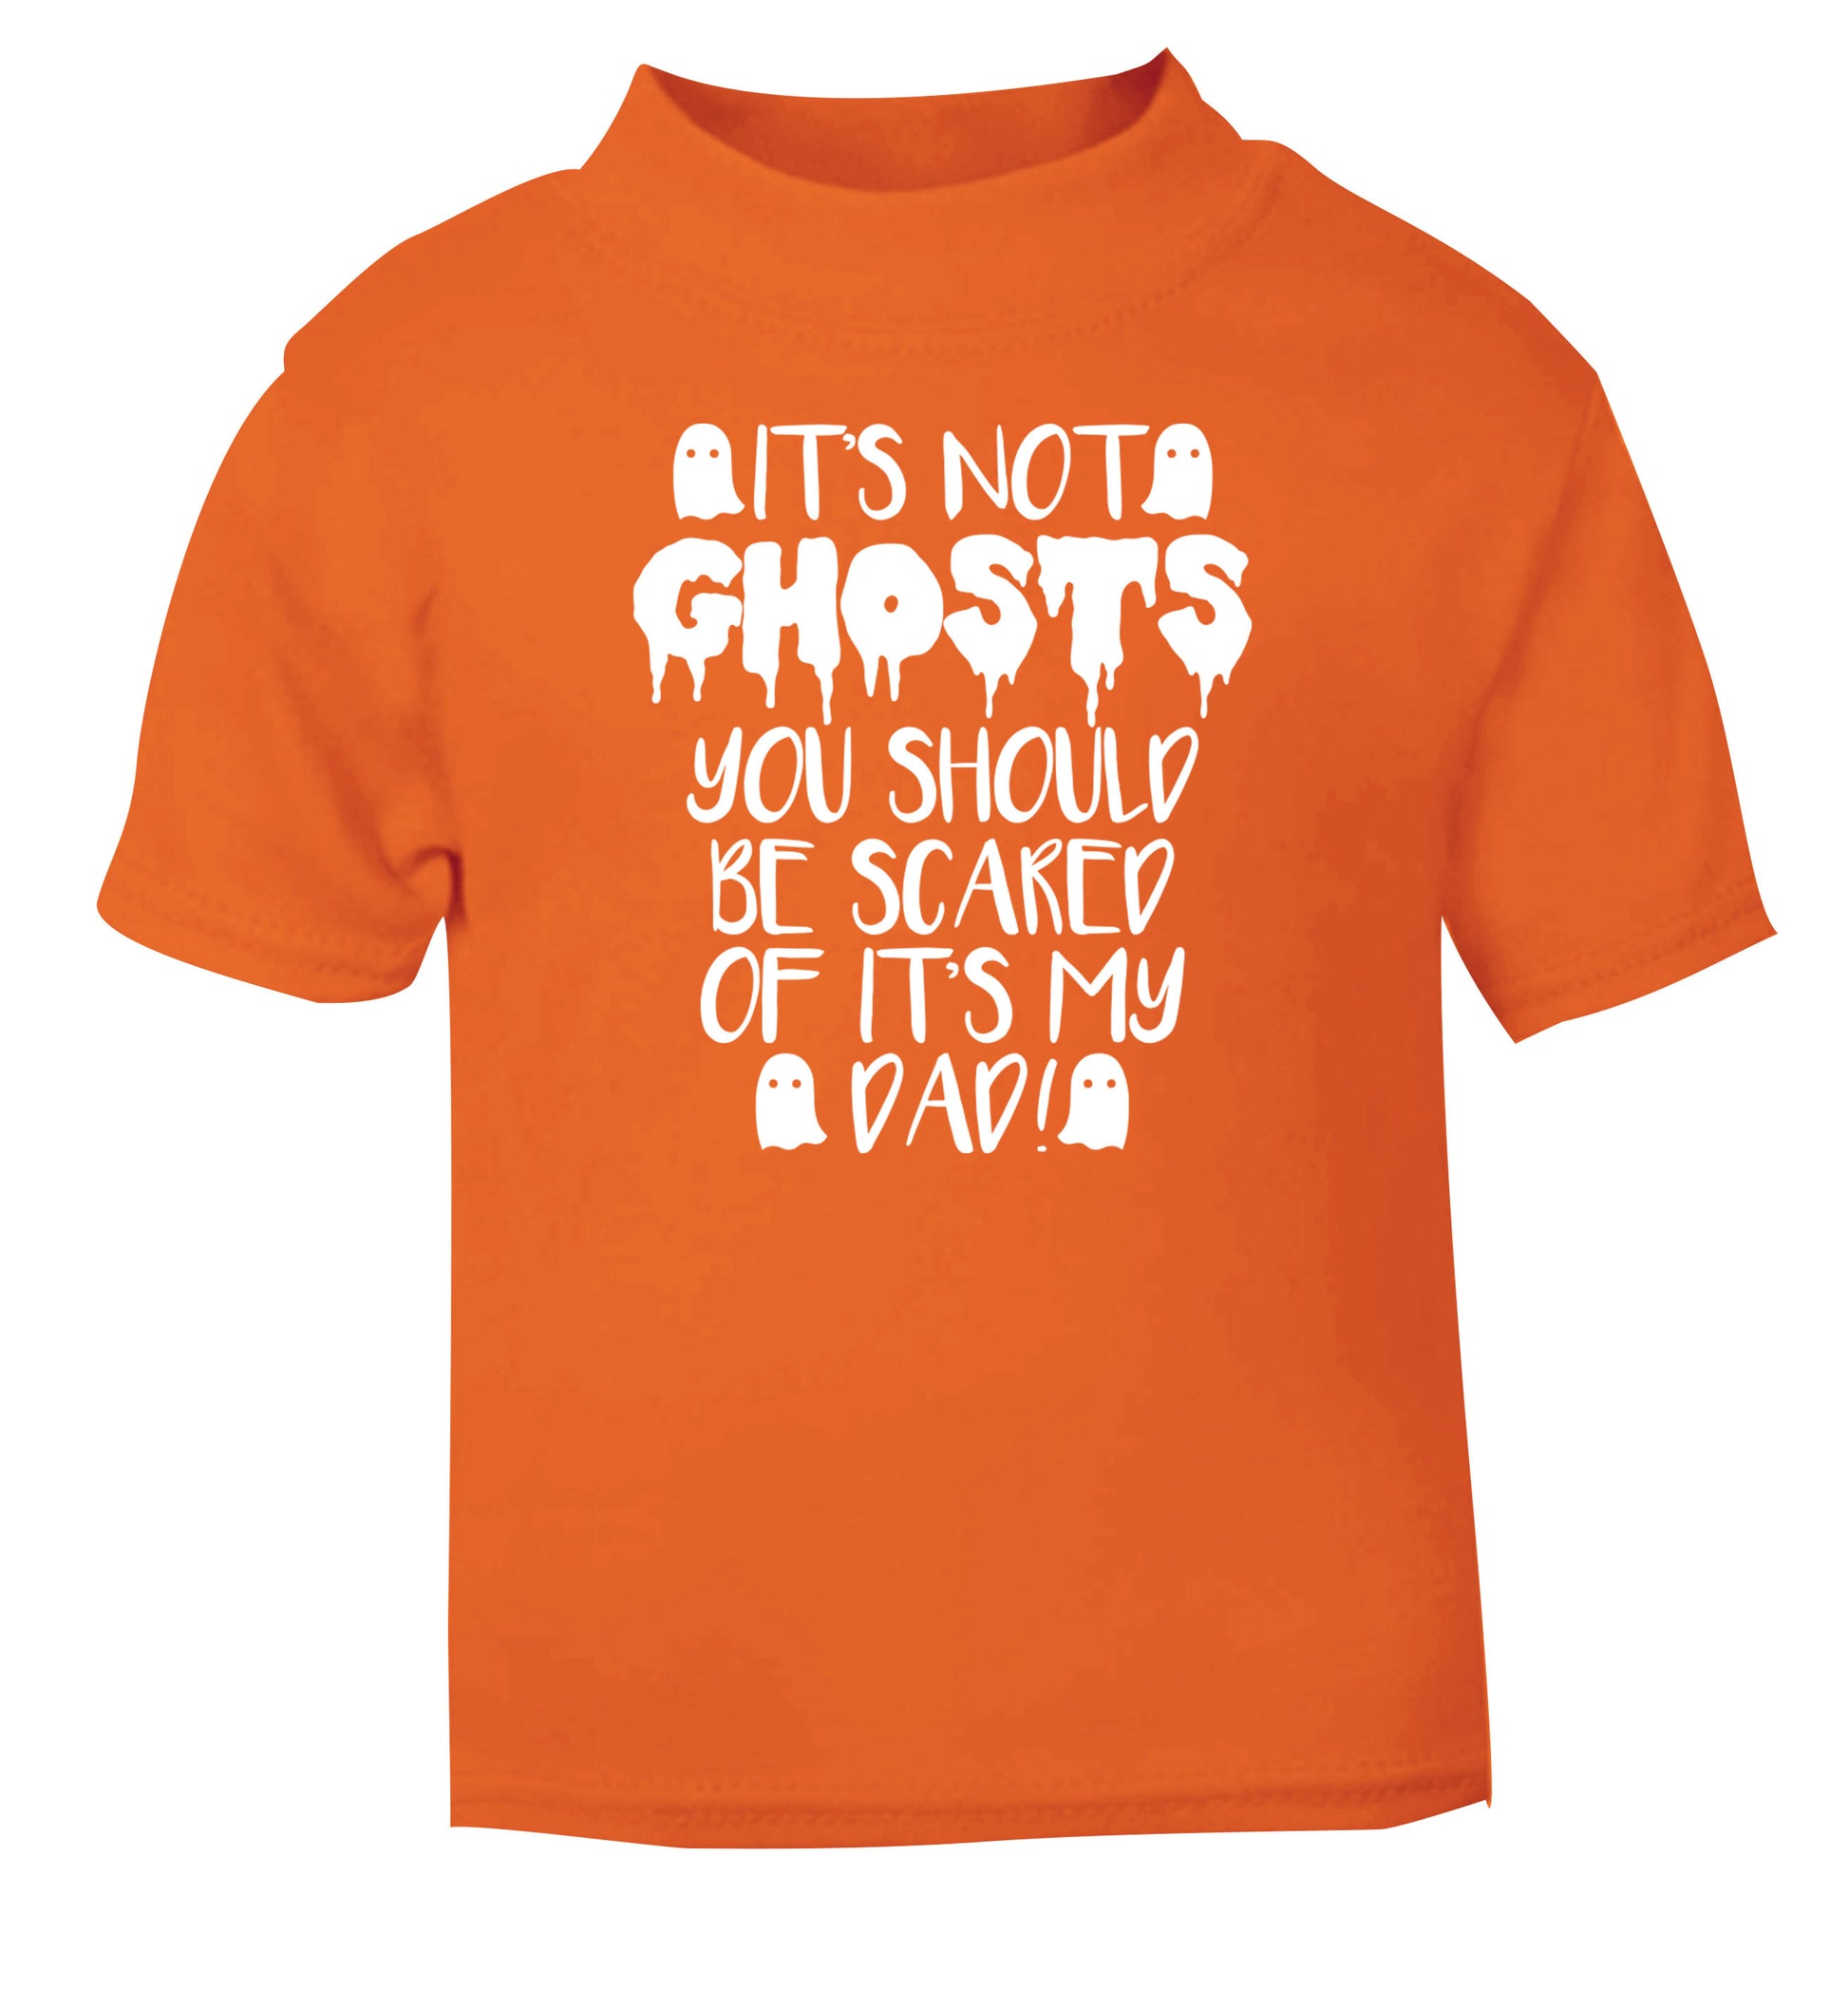 It's not ghosts you should be scared of it's my dad! orange Baby Toddler Tshirt 2 Years